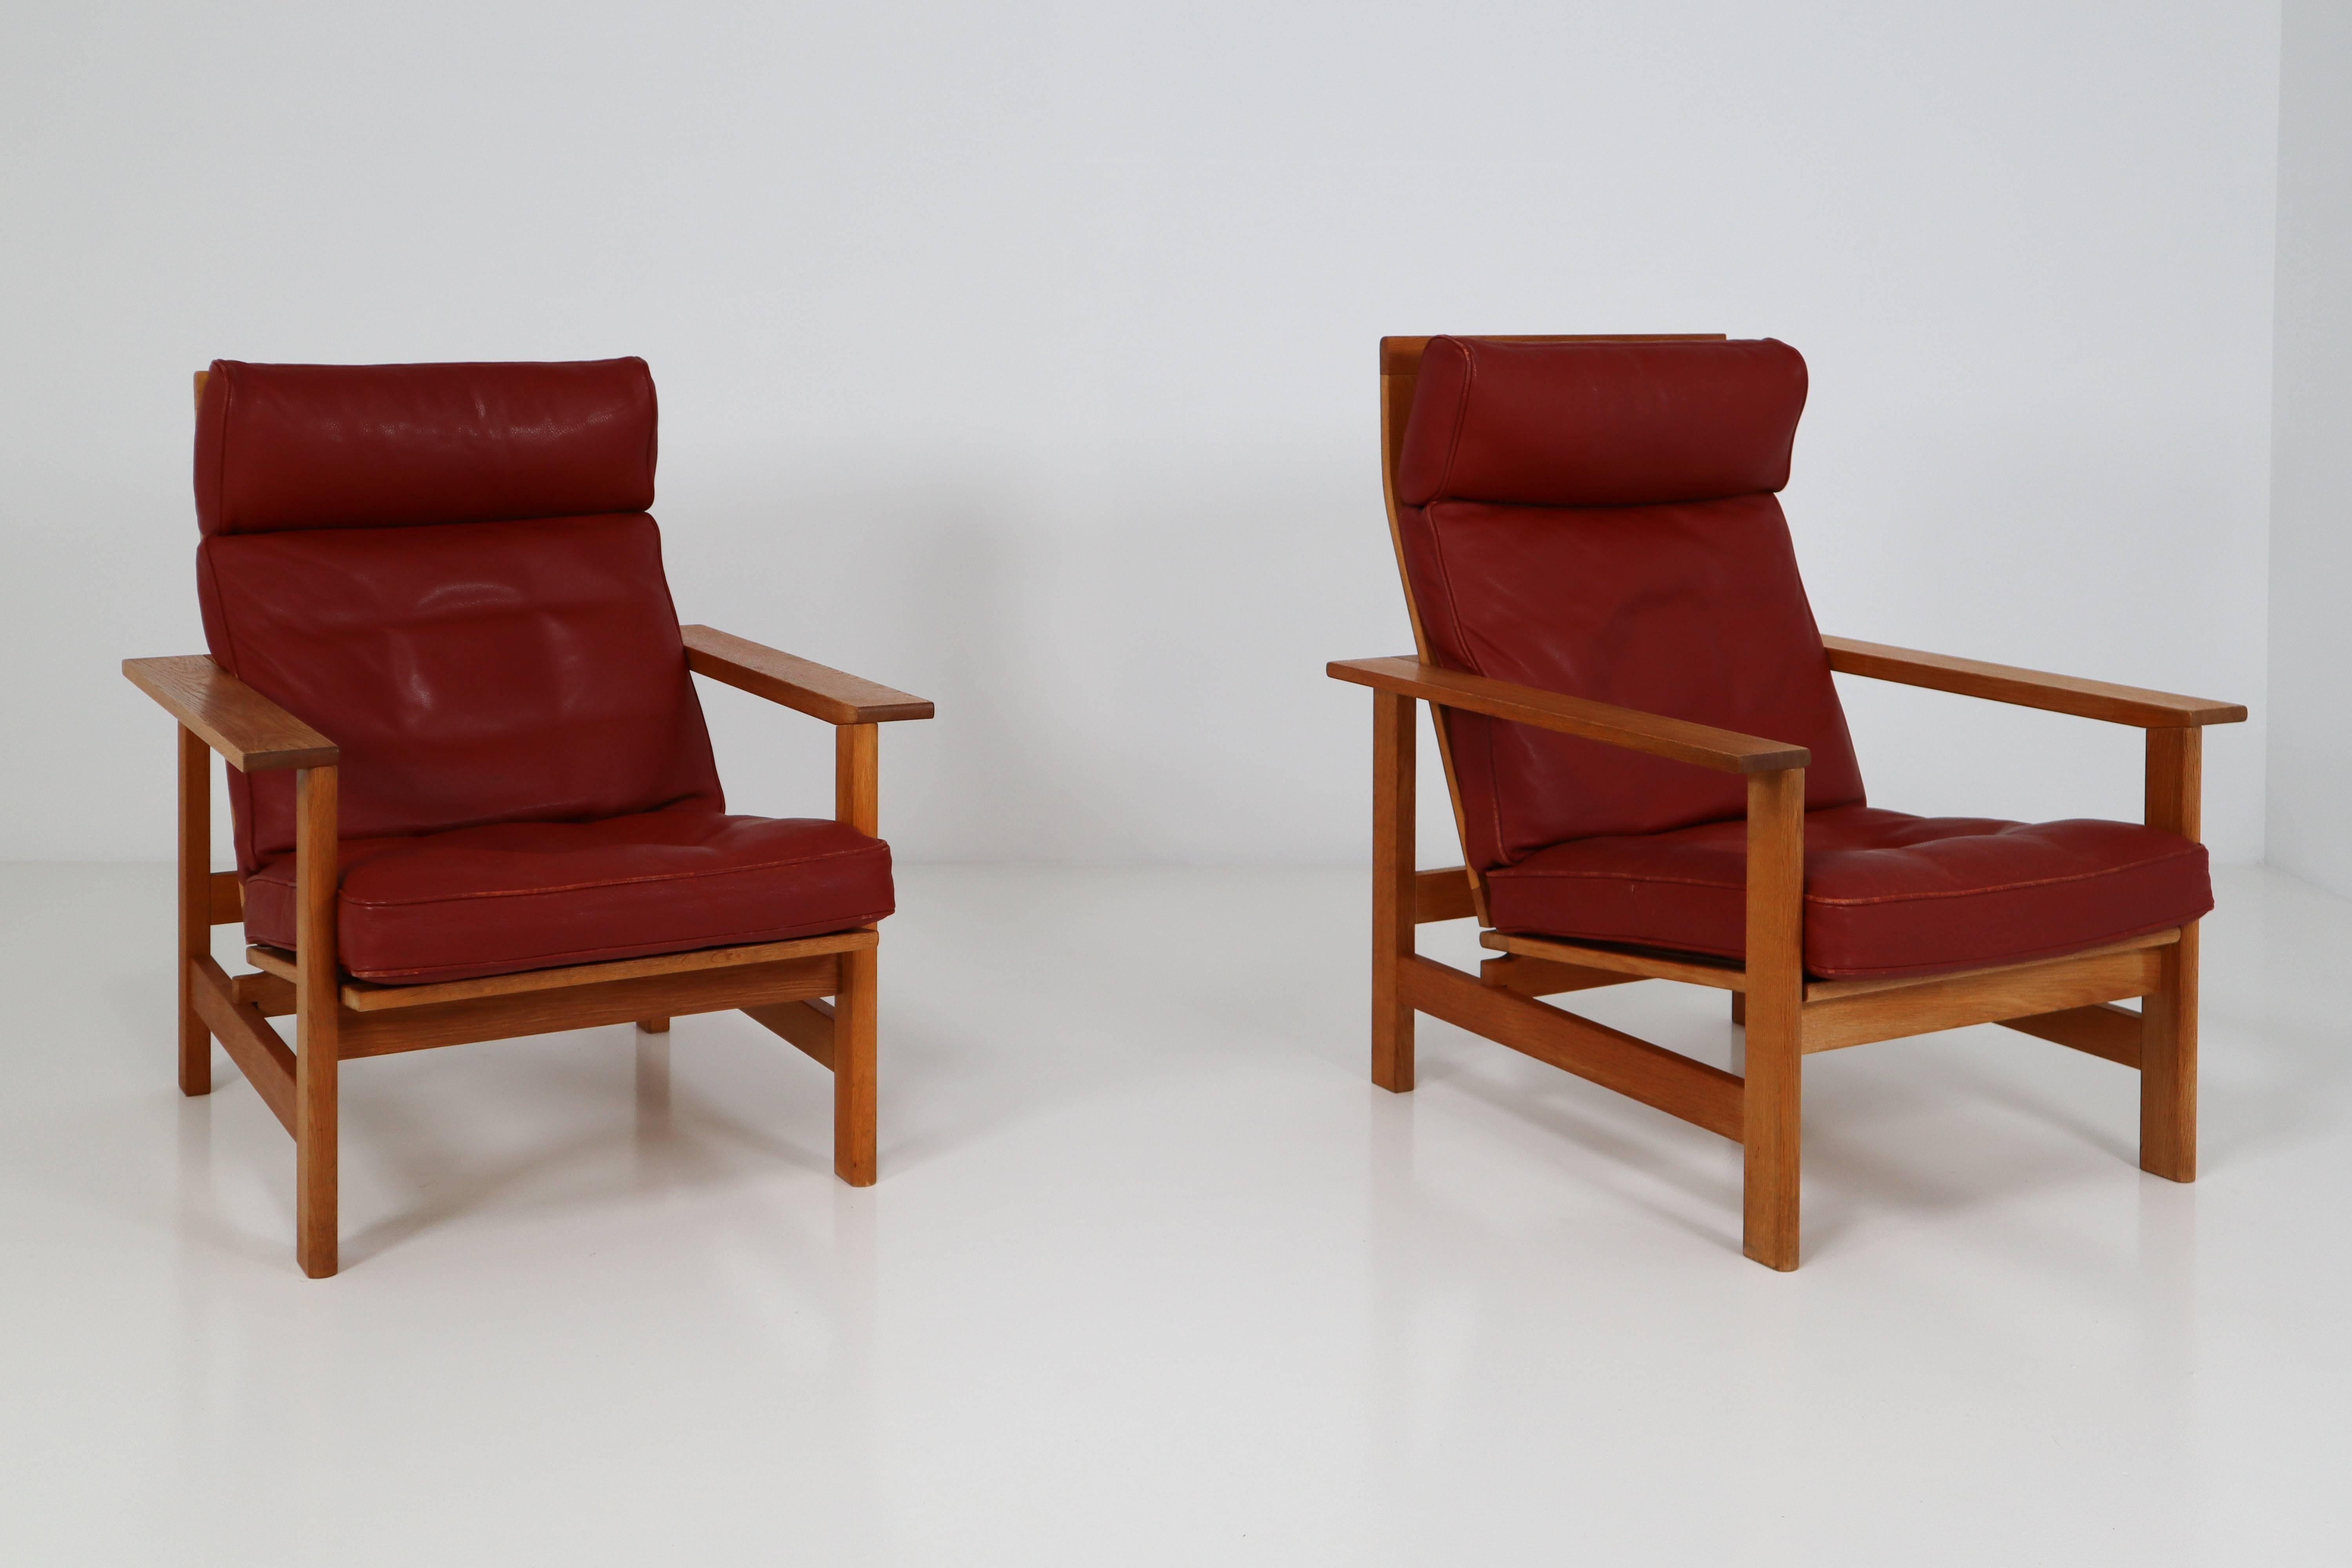 Scandinavian Modern Søren Holst Danish Lounge Chairs in Oak and Leather for Frederecia Furniture